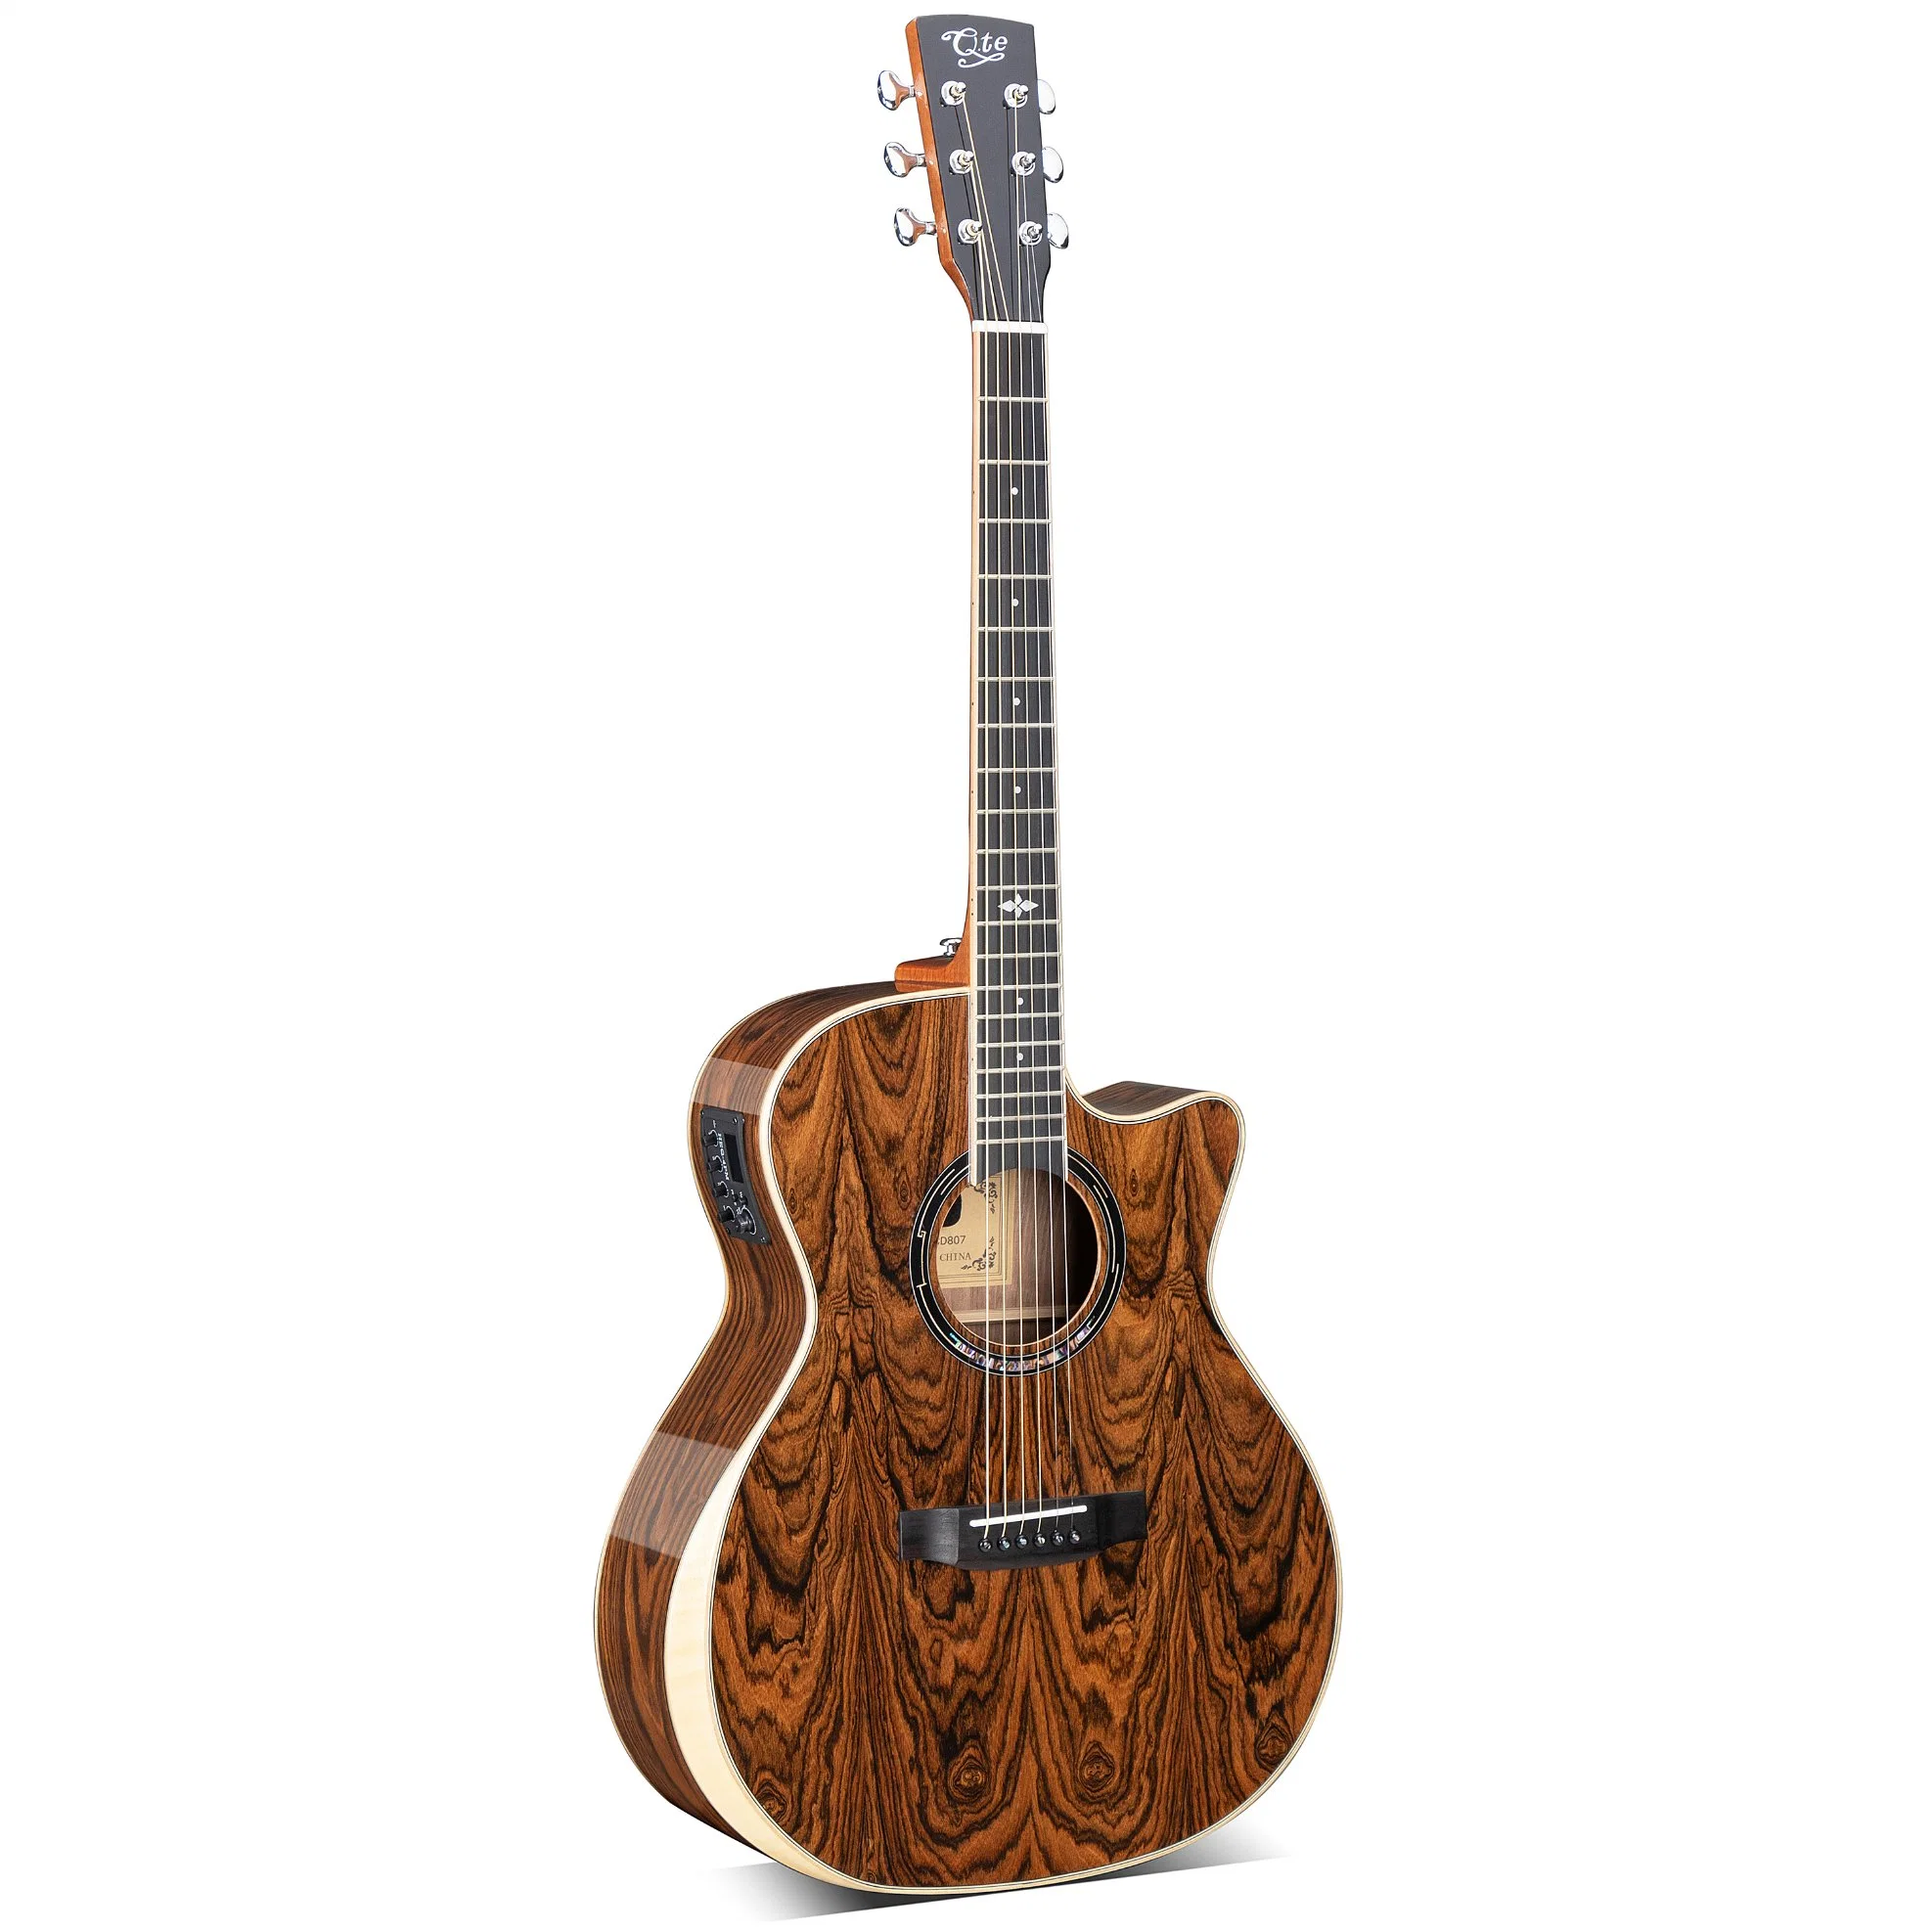 Factory Guitar 41 Inch Quited Butterfly Wood Acoustic Guitar Guitarra